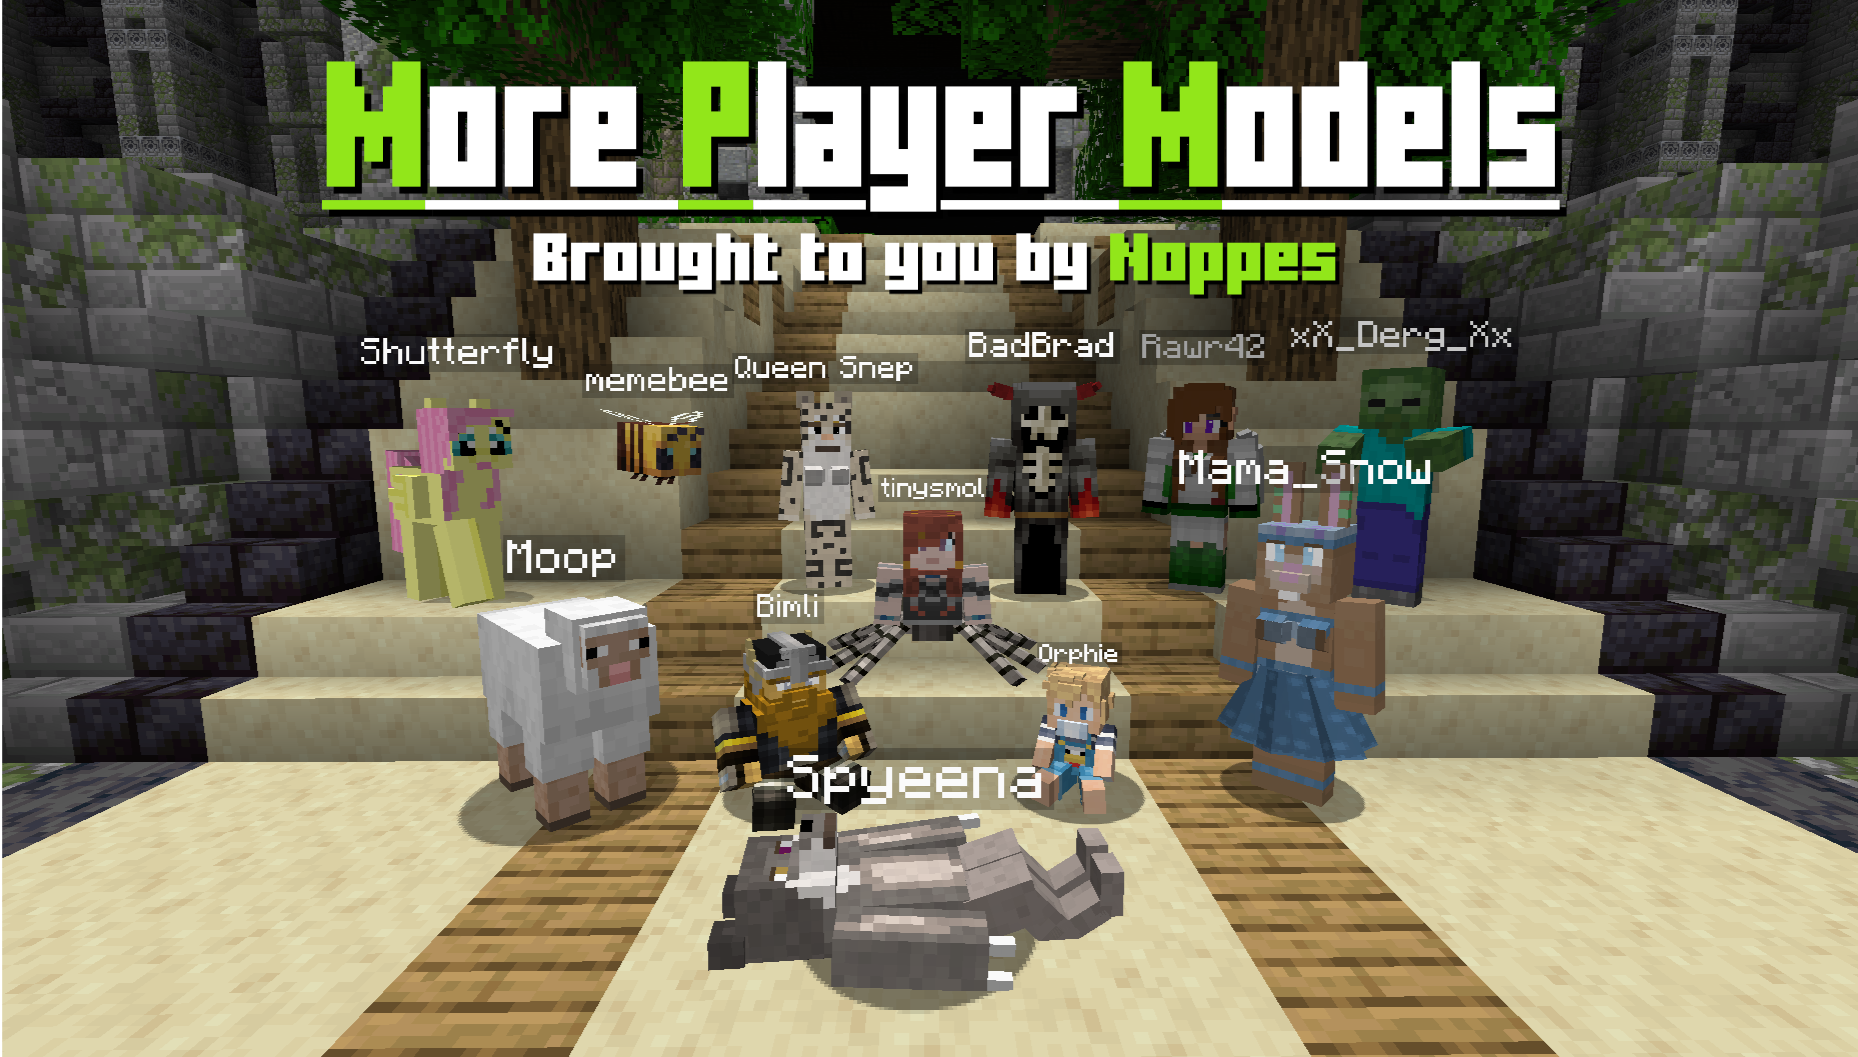 minecraft modpacks with more player models mod